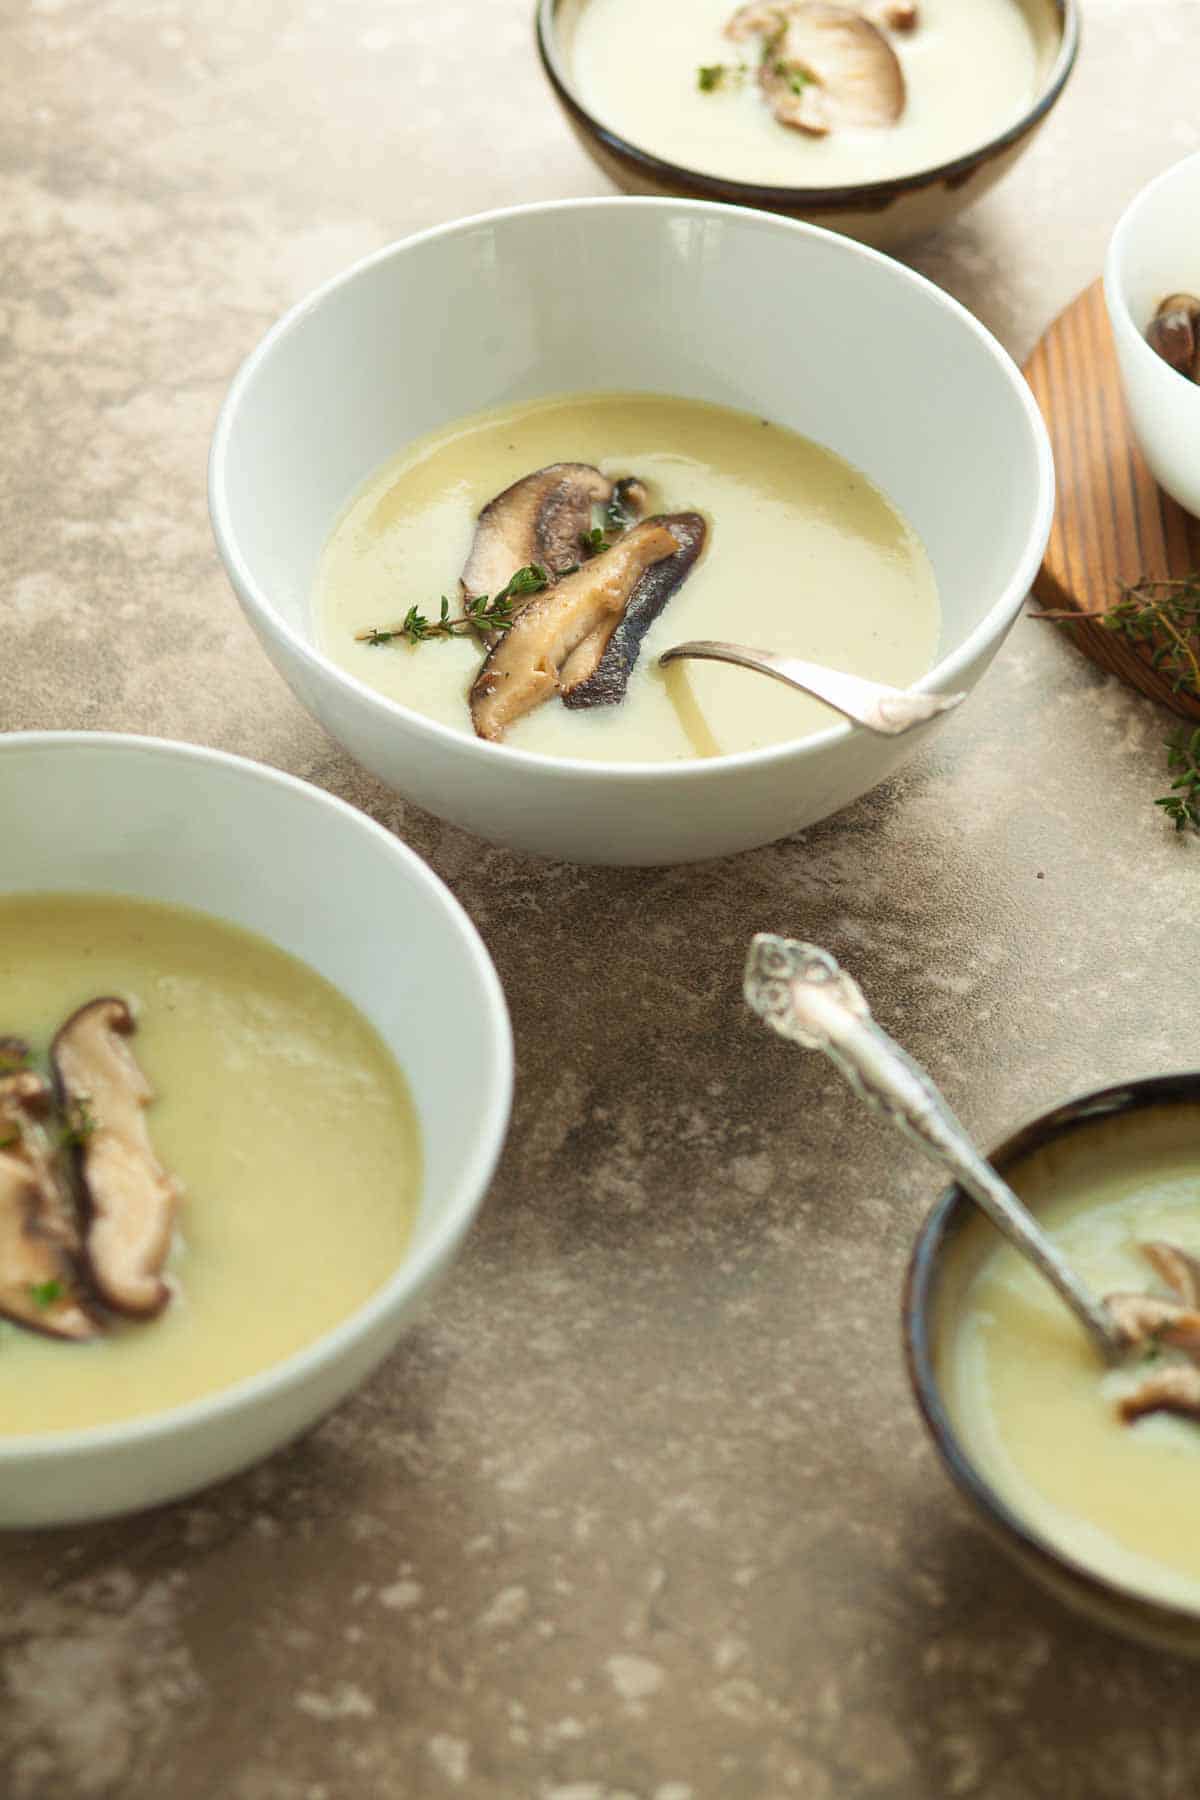 Celery Root and Potato Soup with Sautéed Shiitakes in Bowls with Spoons